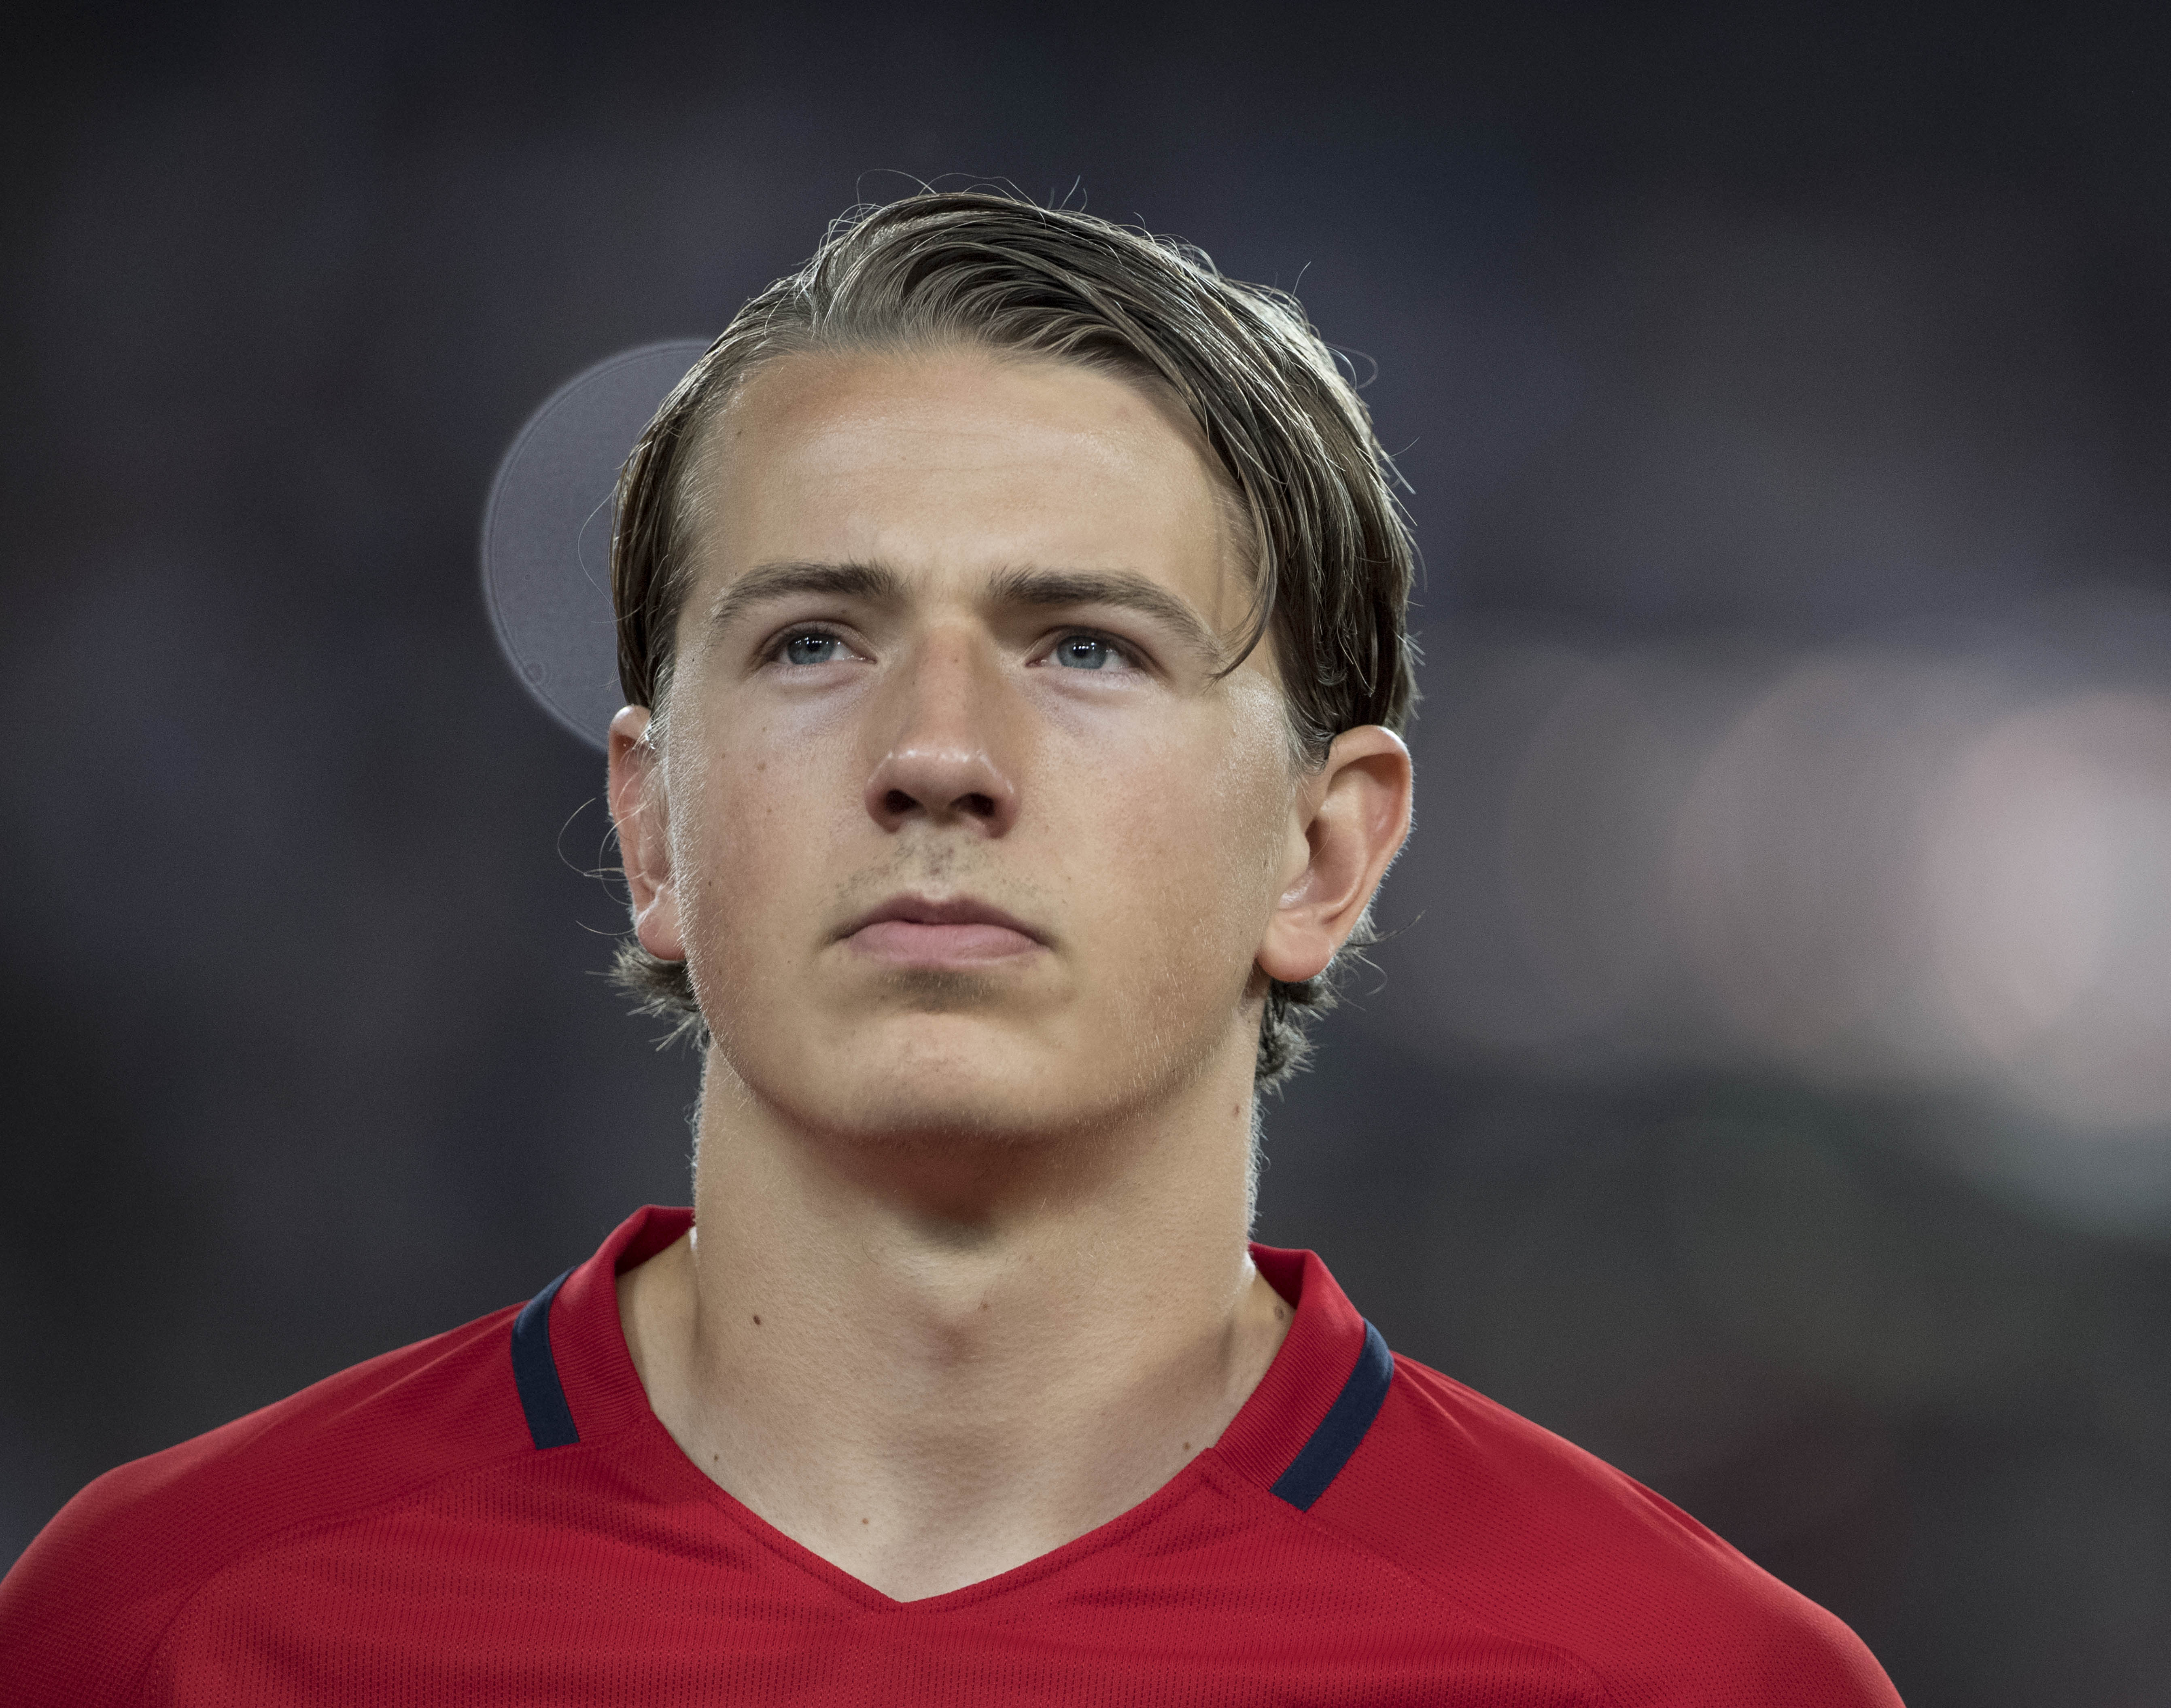 STUTTGART, GERMANY - SEPTEMBER 04: Sander Berge of Norway during the FIFA 2018 World Cup Qualifier between Germany and Norway at Mercedes-Benz Arena on September 4, 2017 in Stuttgart, Baden-Wuerttemberg. (Photo by Trond Tandberg/Getty Images)